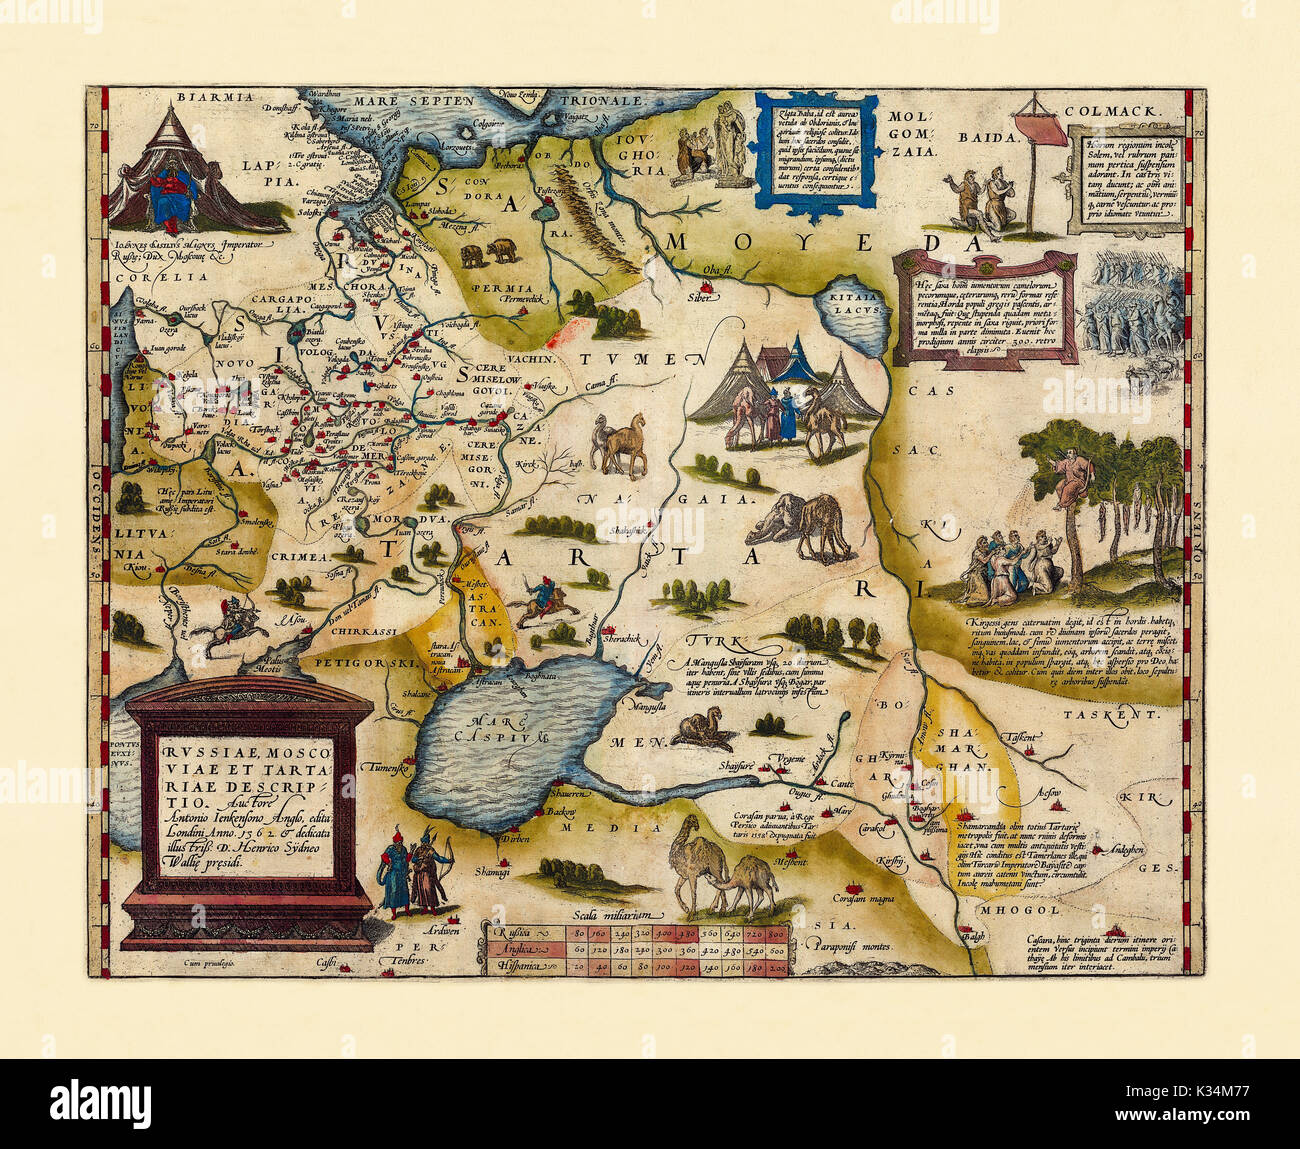 Old map of Russia. Excellent state of preservation realized in ancient style. All the graphic composition is rich of old illustrations. By Ortelius, Theatrum Orbis Terrarum, Antwerp, 1570 Stock Photo